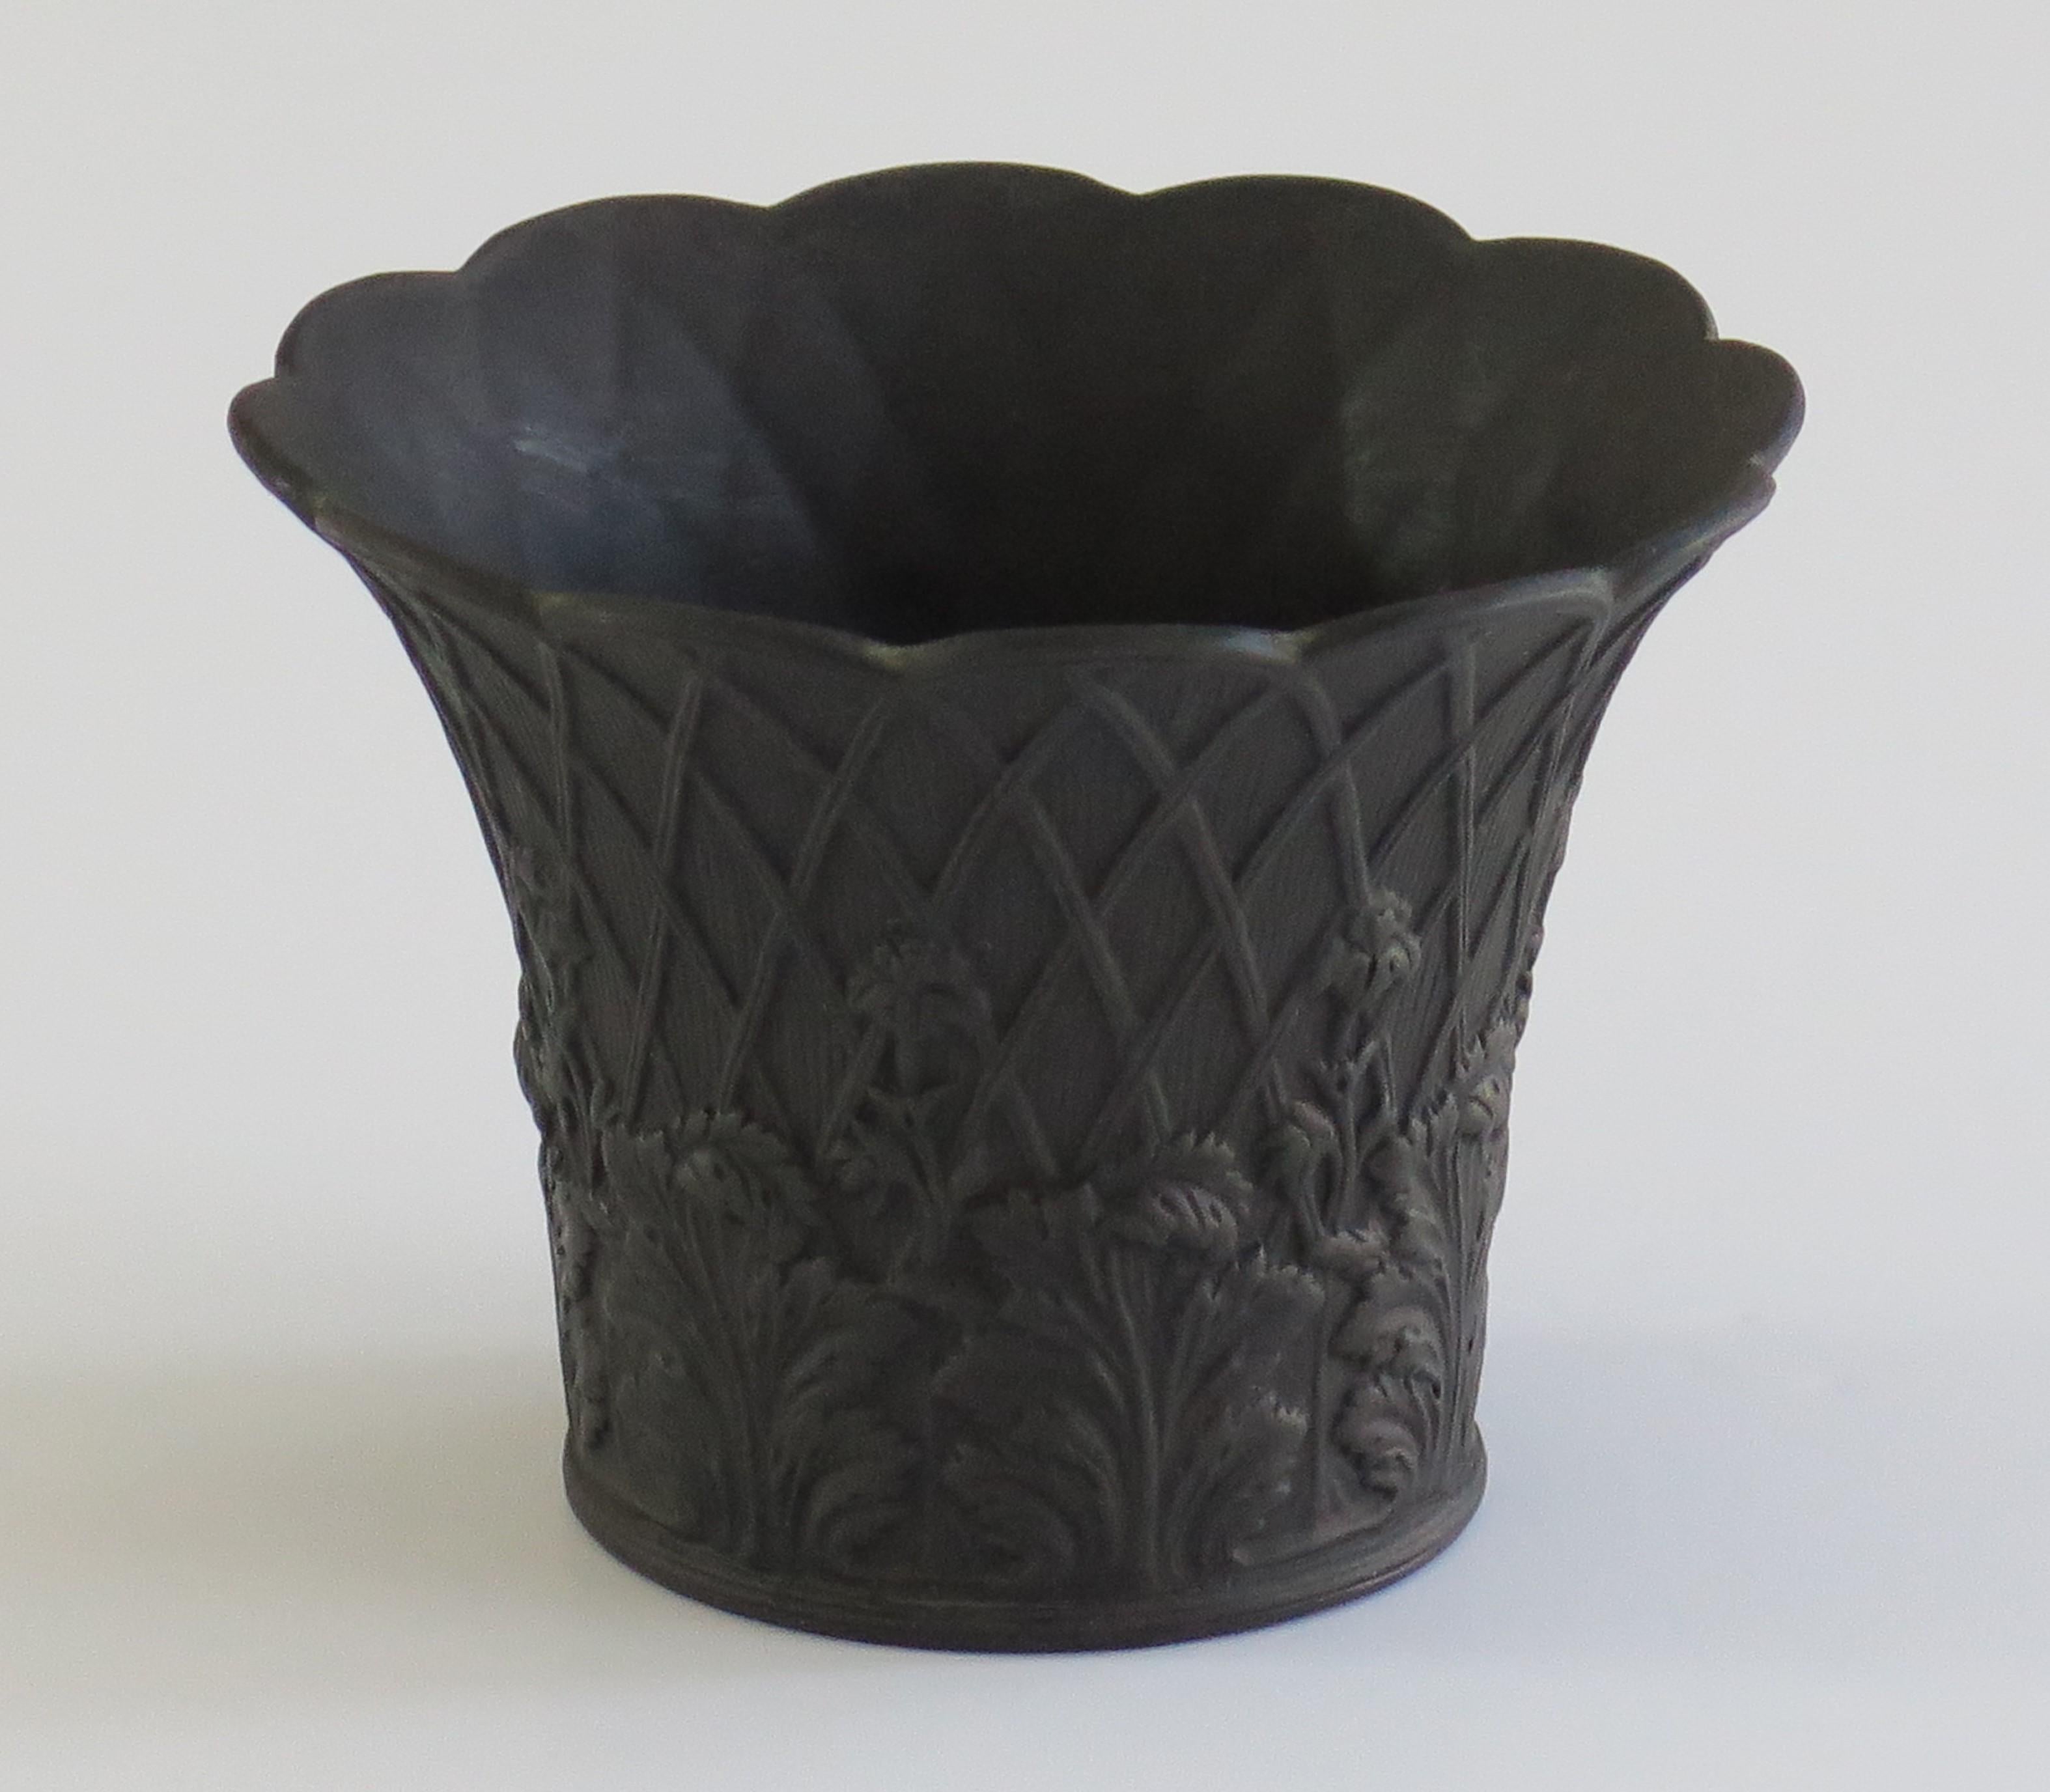 Hand-Crafted Wedgwood Black Basalt Flowerpot in Trellis Pattern, English Early 20th Century